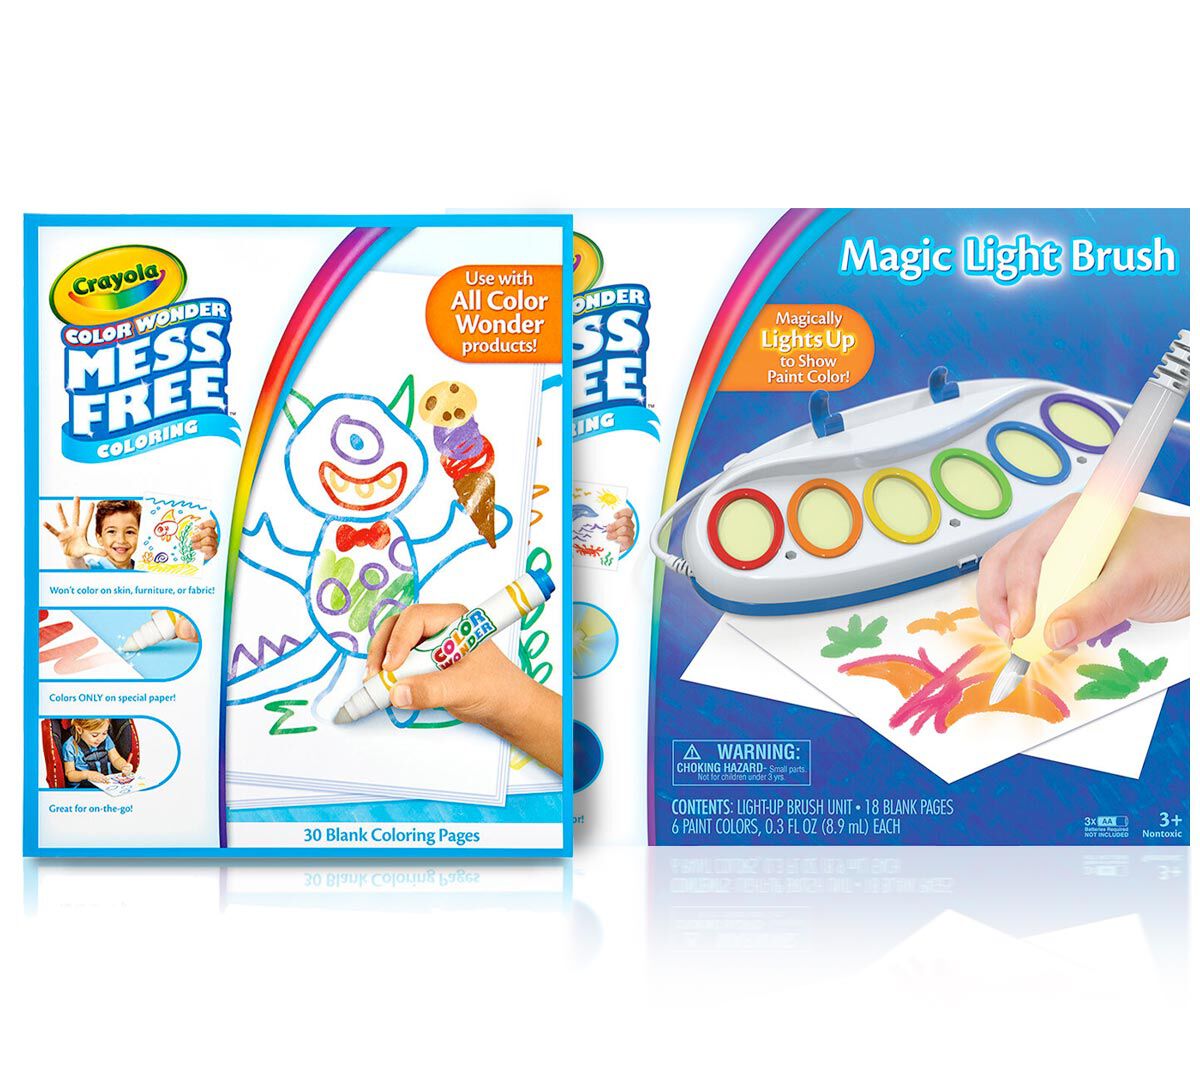 Finger paint kit 'stands up' at retailer's command (sidebar)